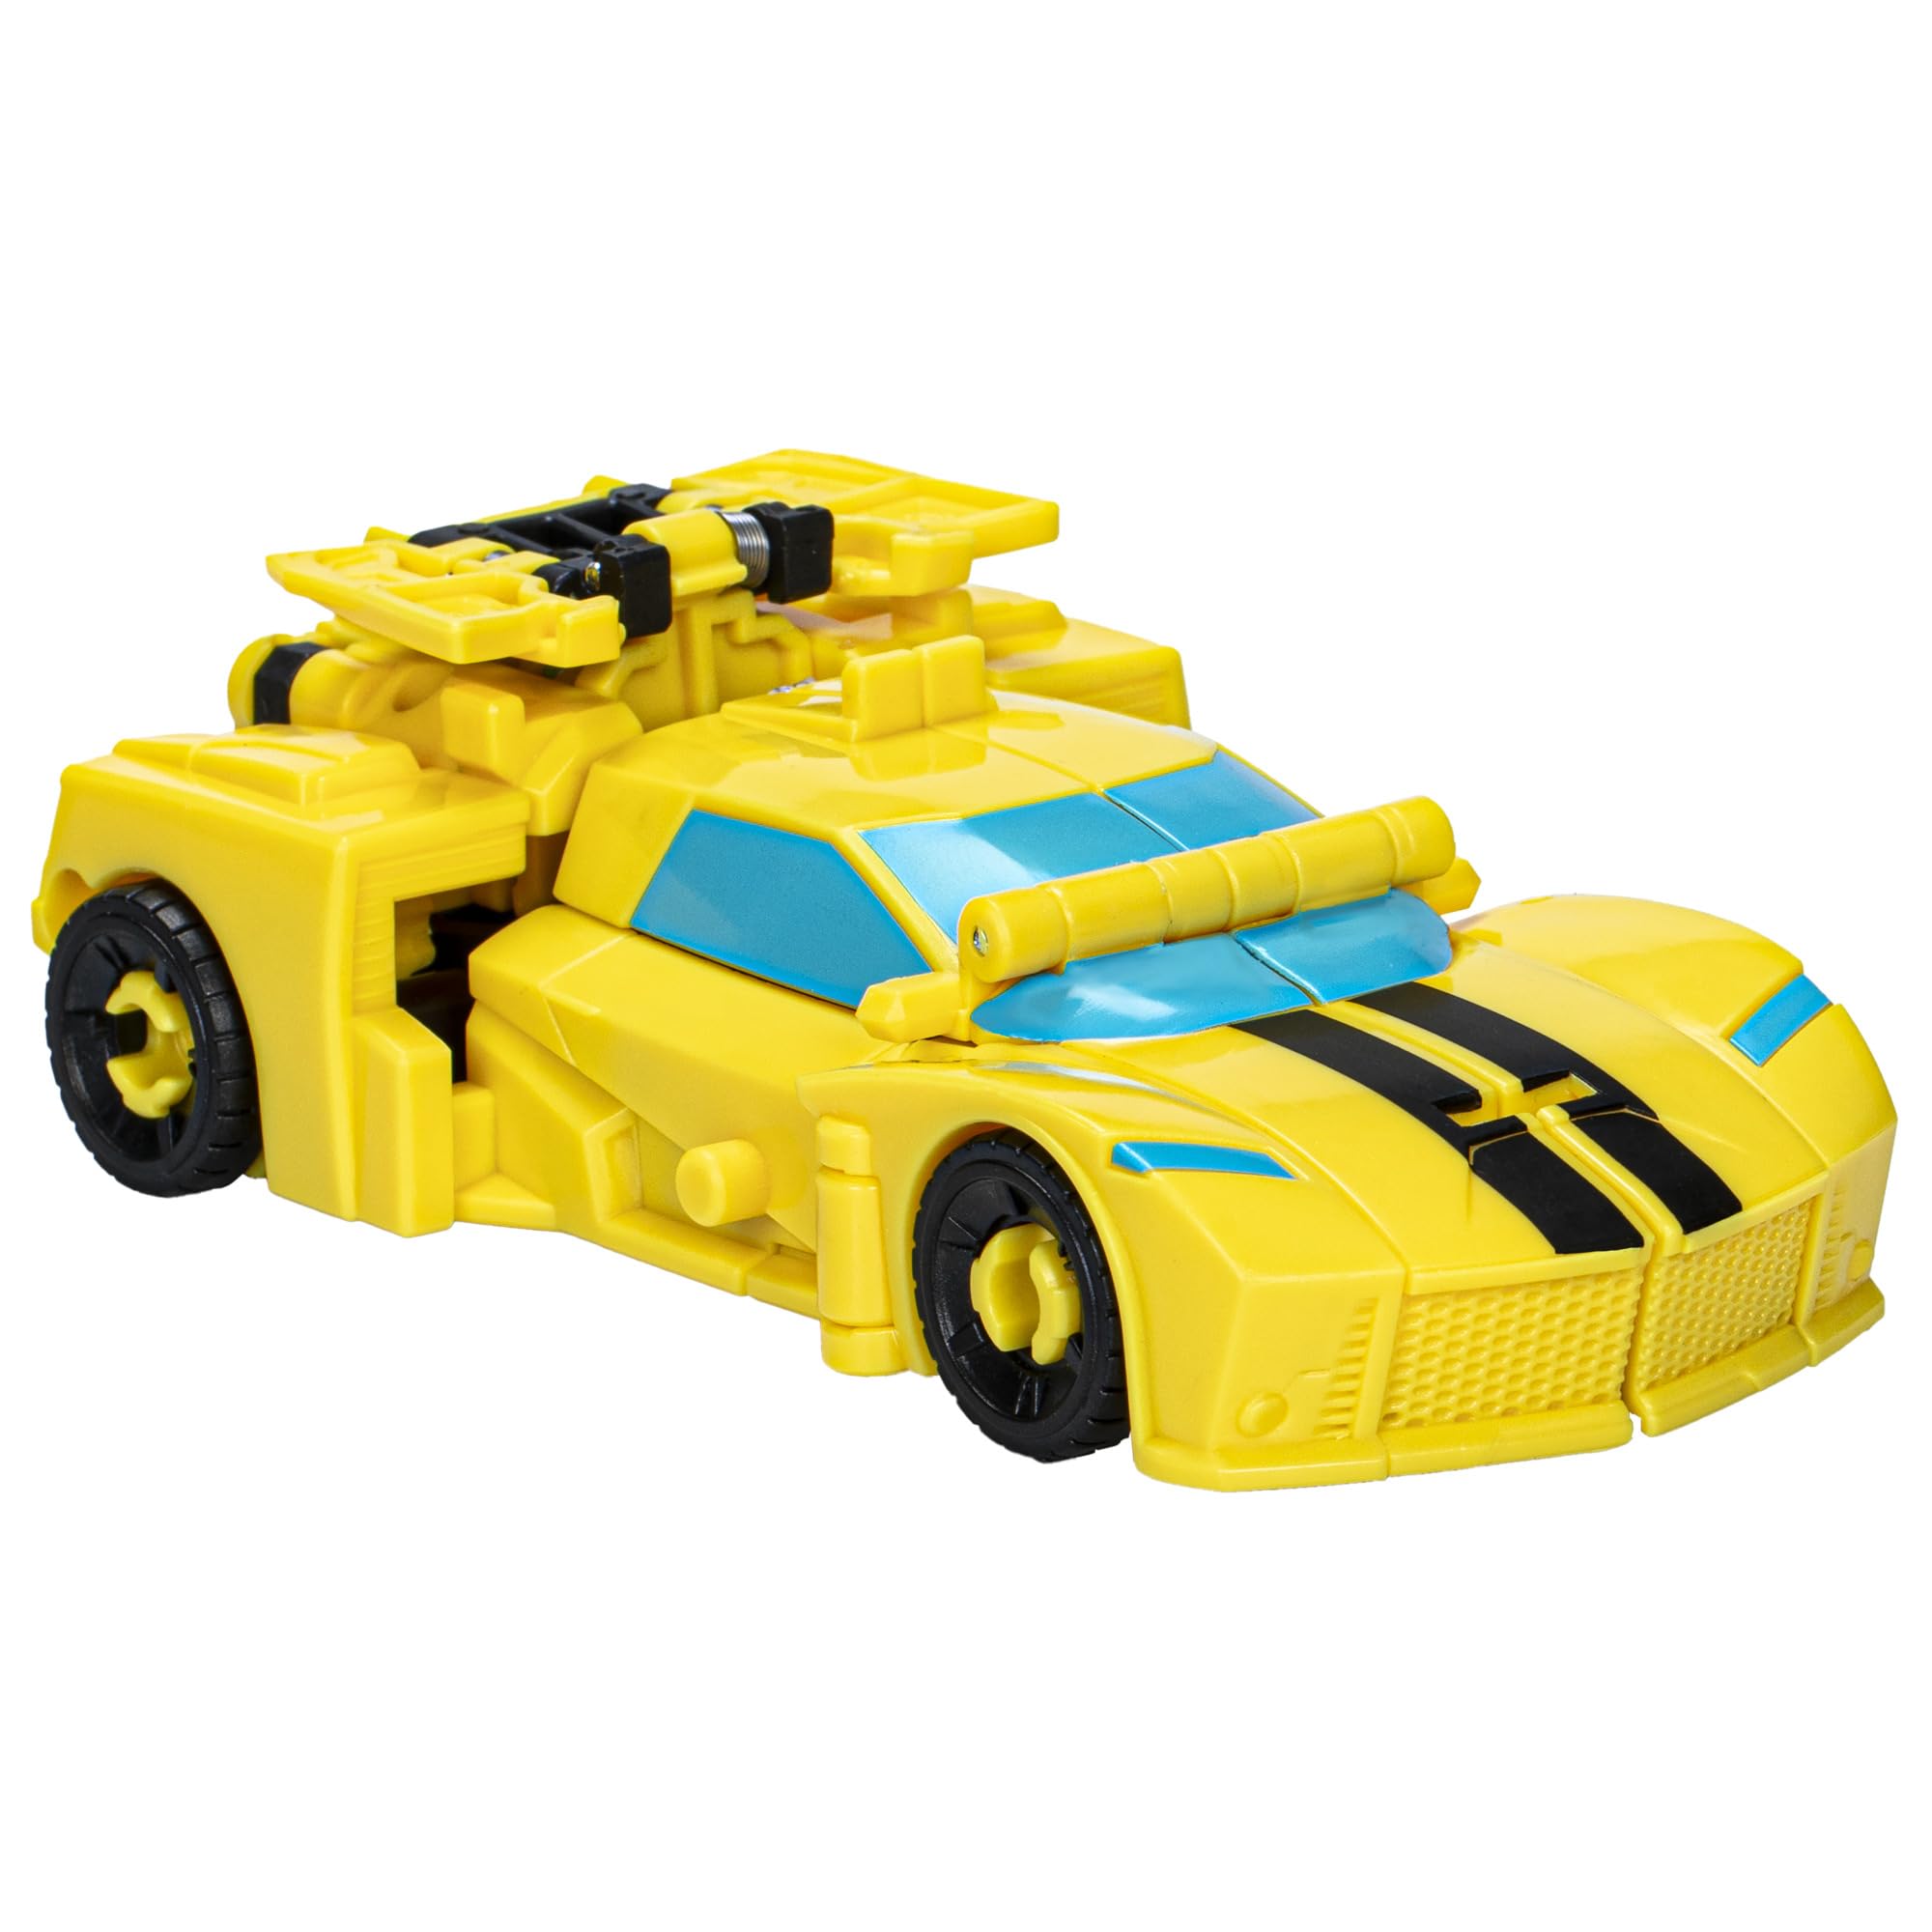 TRANSFORMERS EarthSpark Cyber-Combiner Bumblebee and Mo Malto Robot Action Figures, Interactive Toys for Boys and Girls Ages 6 and Up